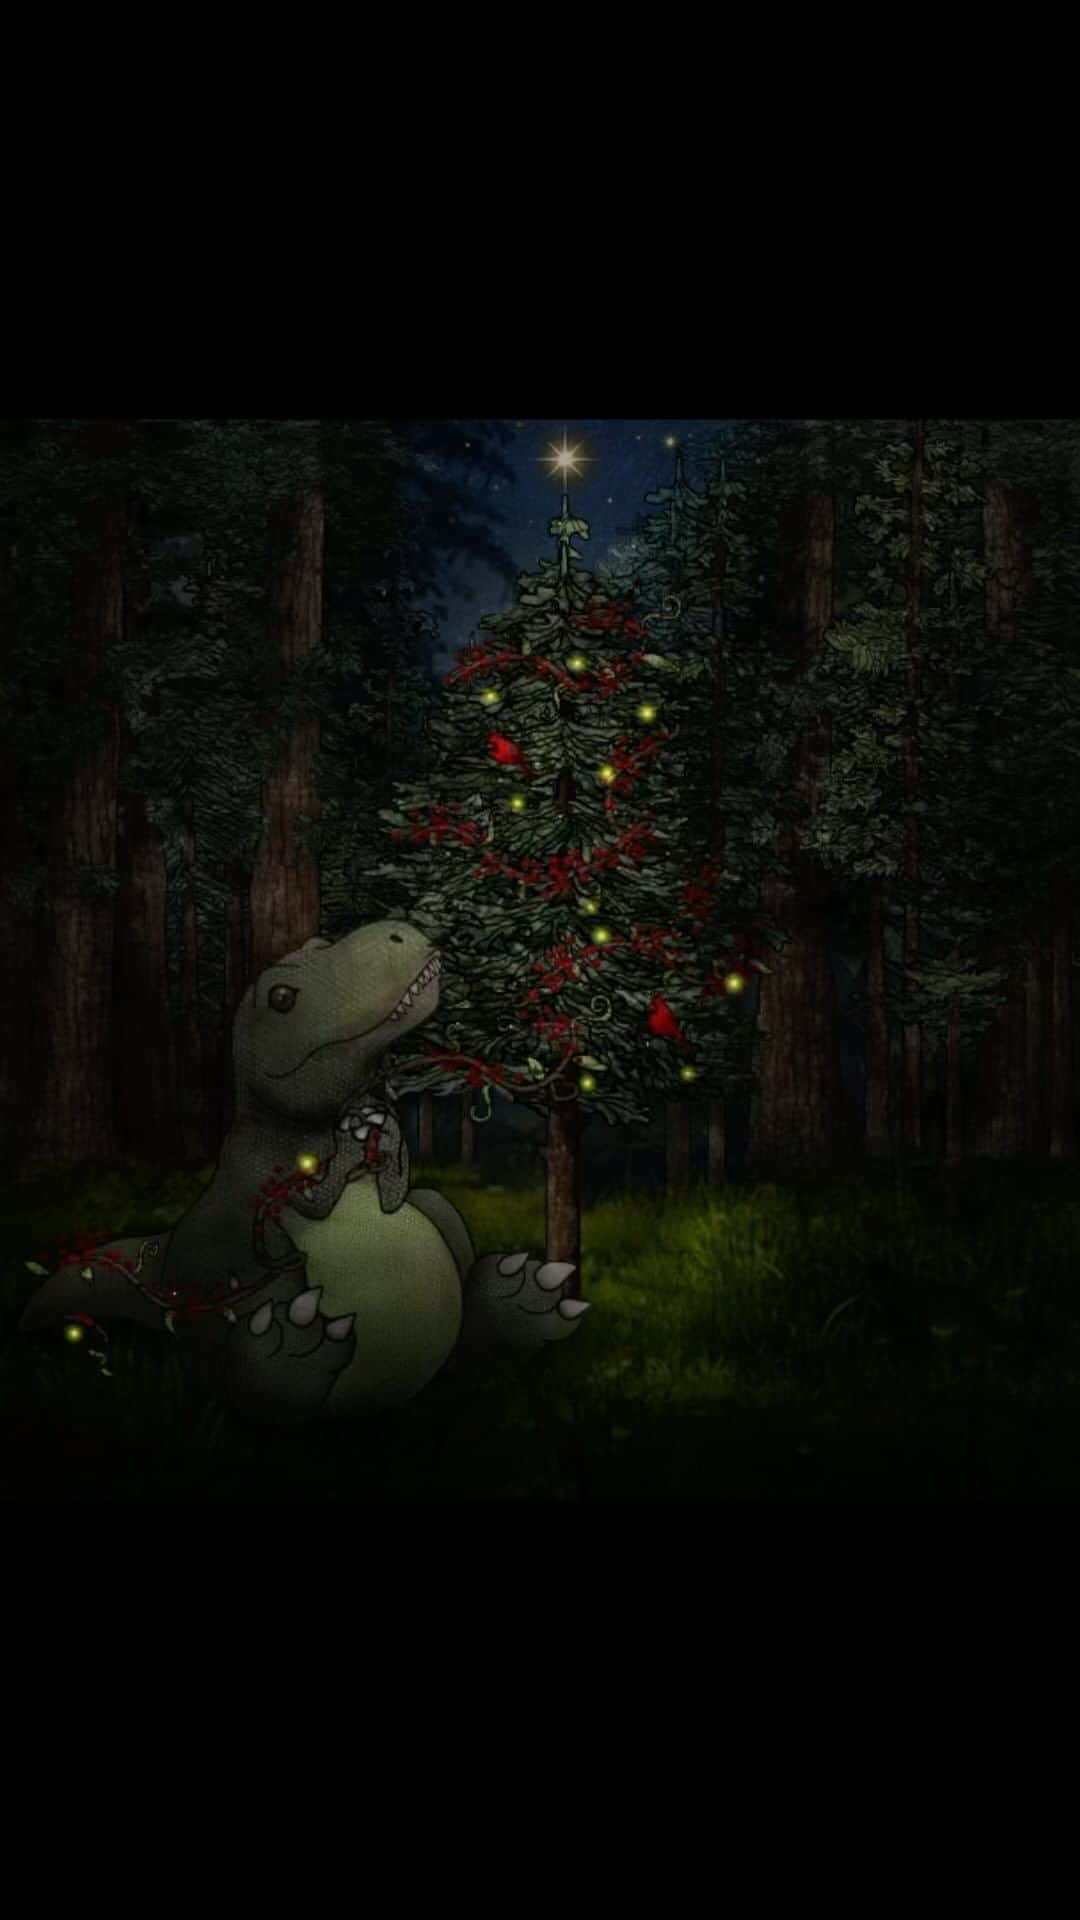 Rachel Ryleのインスタグラム：「“NFTree Rex” Open Edition -SOLD-  -Story- NFTrex spotted a vine of berries tangled up in a tiny tree. A couple of cardinals kindly chirped, inviting NFTrex to have a seat & eat the sweet treat. To much delight at moonlight the tree lit up with fireflies, as they all gathered in the berry branches at bedtime. The stars twinkled in the sky as the tree twinkled through the night, and all was berry & bright!  #rachelryle #animation #illustration #christmas #holiday #dinosaur #christmastree」